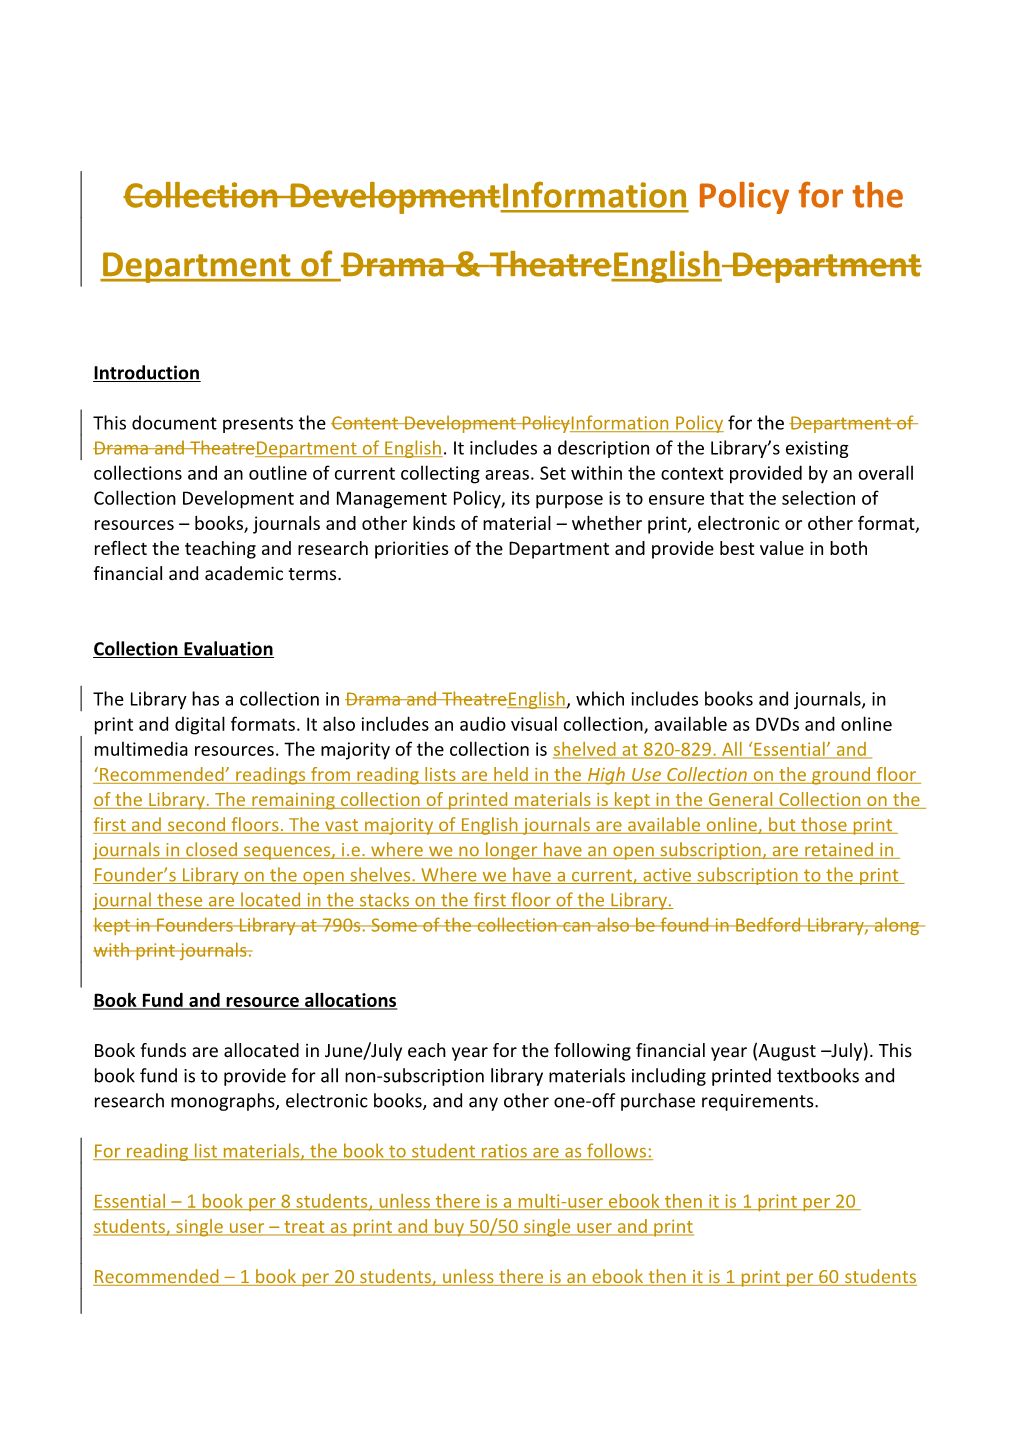 Collection Development Information Policy for the Department of Drama & Theatreenglish